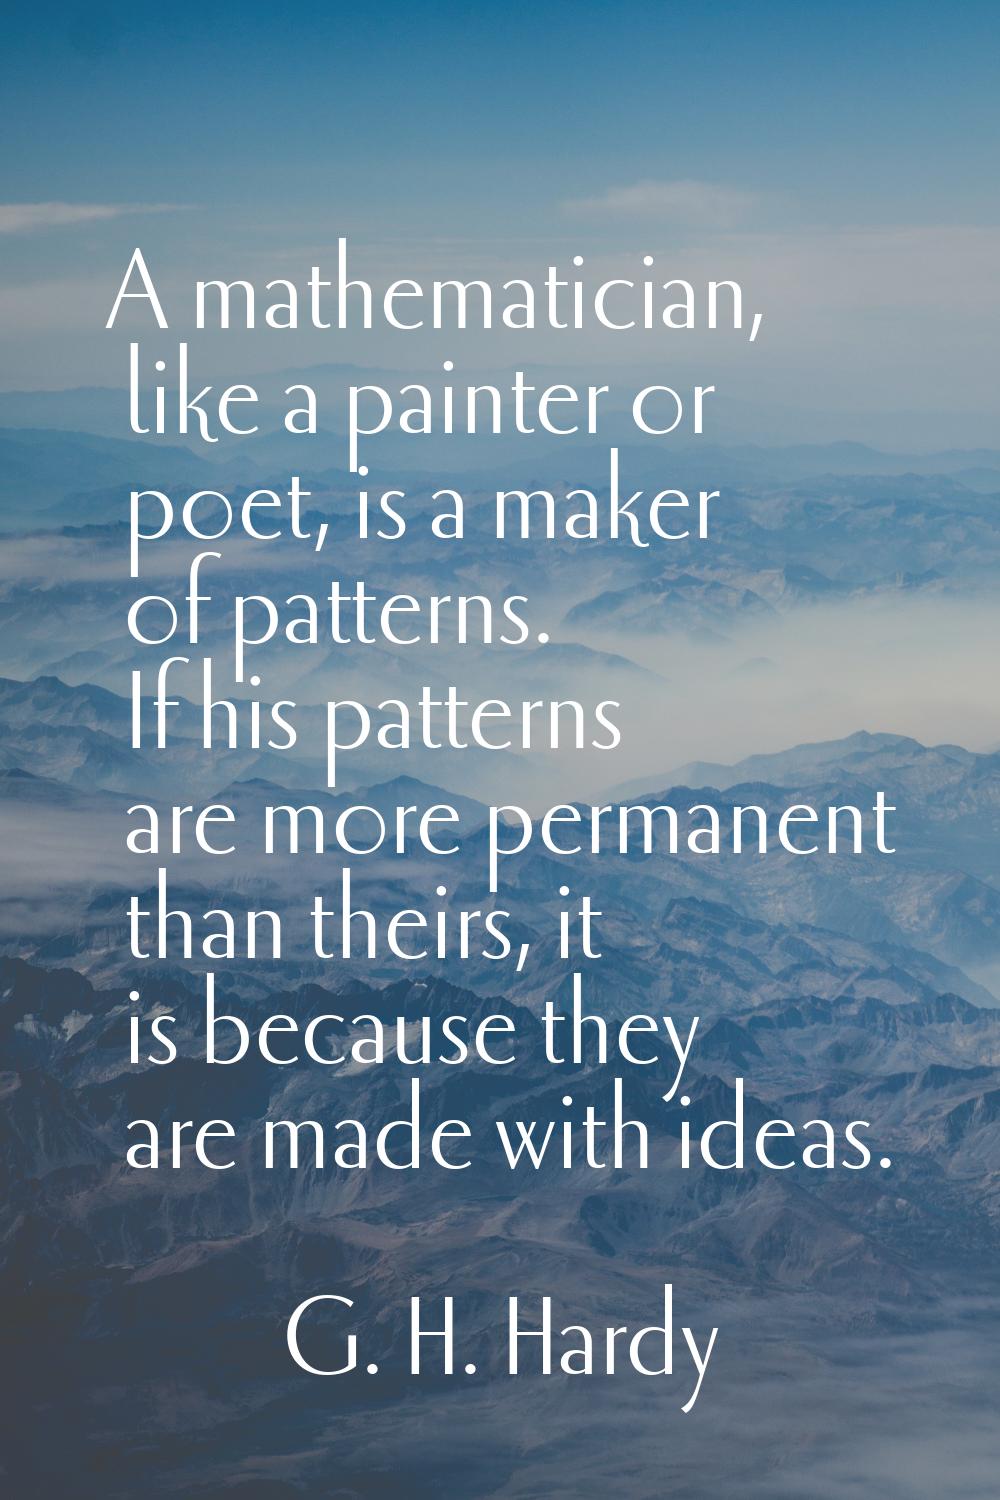 A mathematician, like a painter or poet, is a maker of patterns. If his patterns are more permanent